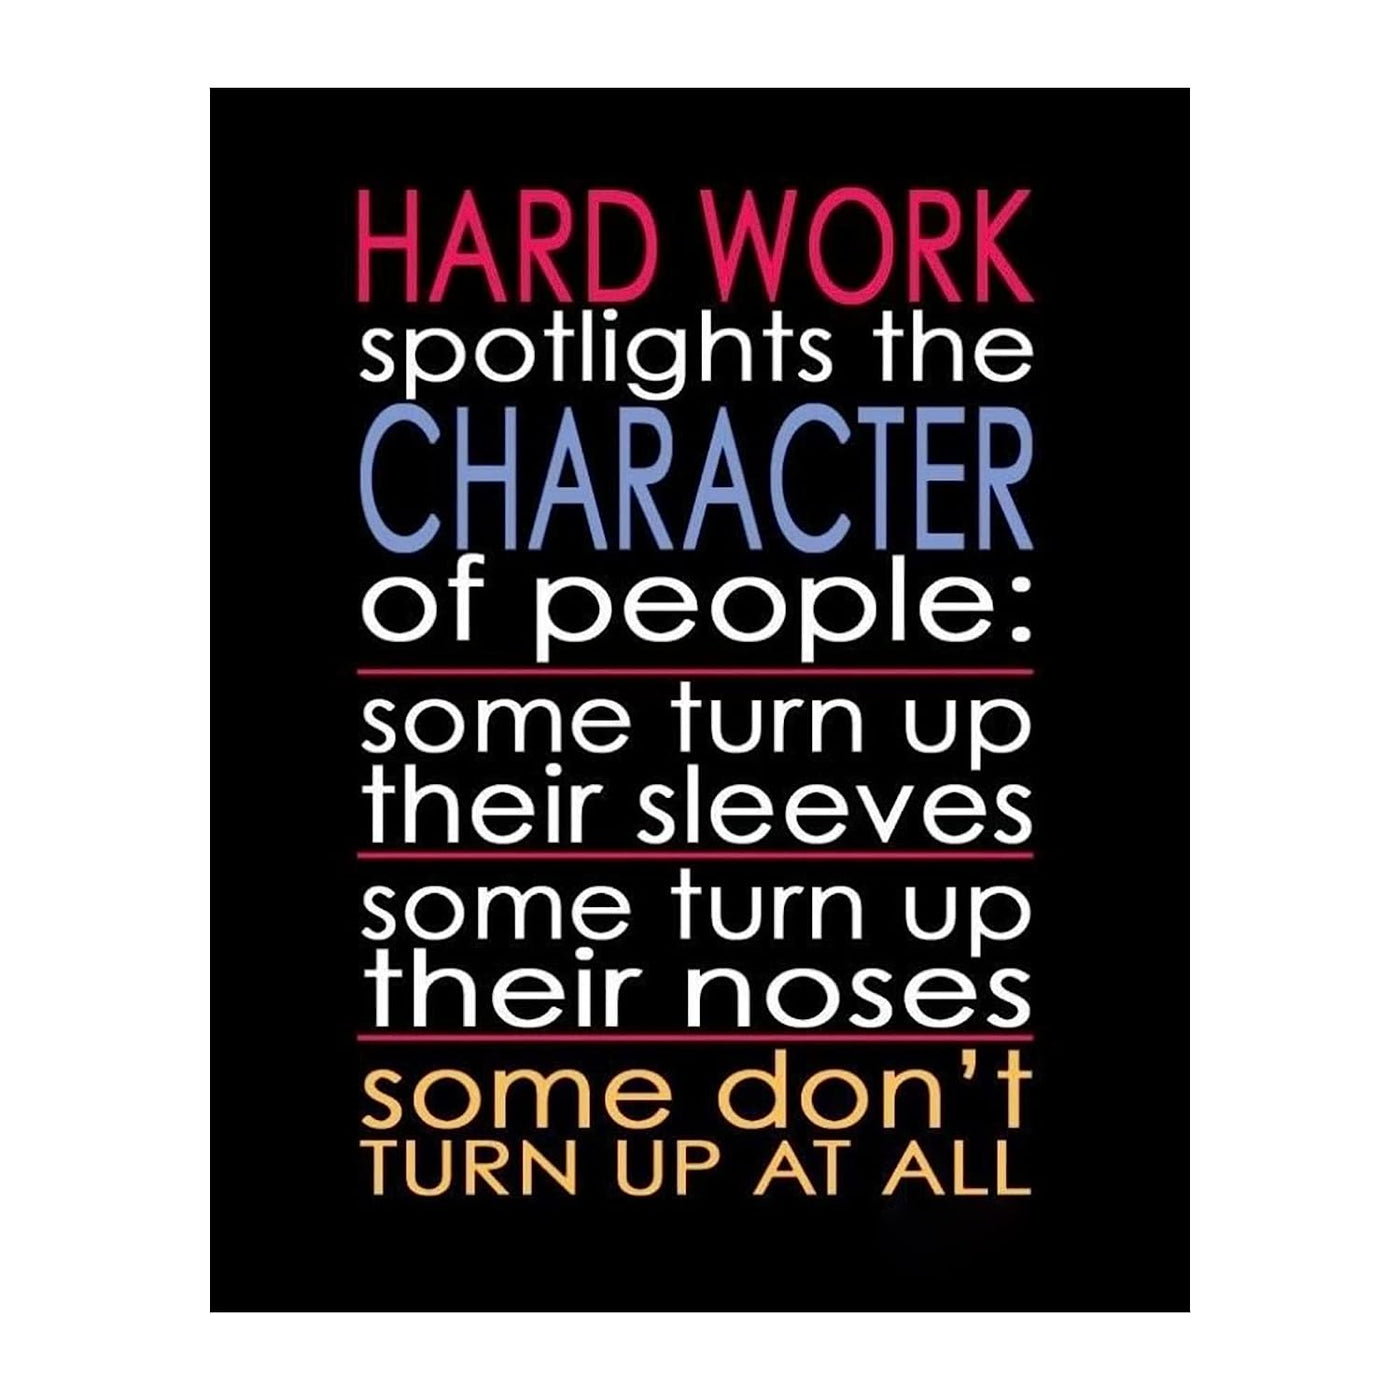 Hard Work Spotlights the Character of People-Motivational Wall Art- 8 x 10" Poster Print-Ready to Frame. Ideal for Home, School, Gym & Workplace D?cor. Inspire & Encourage Your Team to"Turn Up"